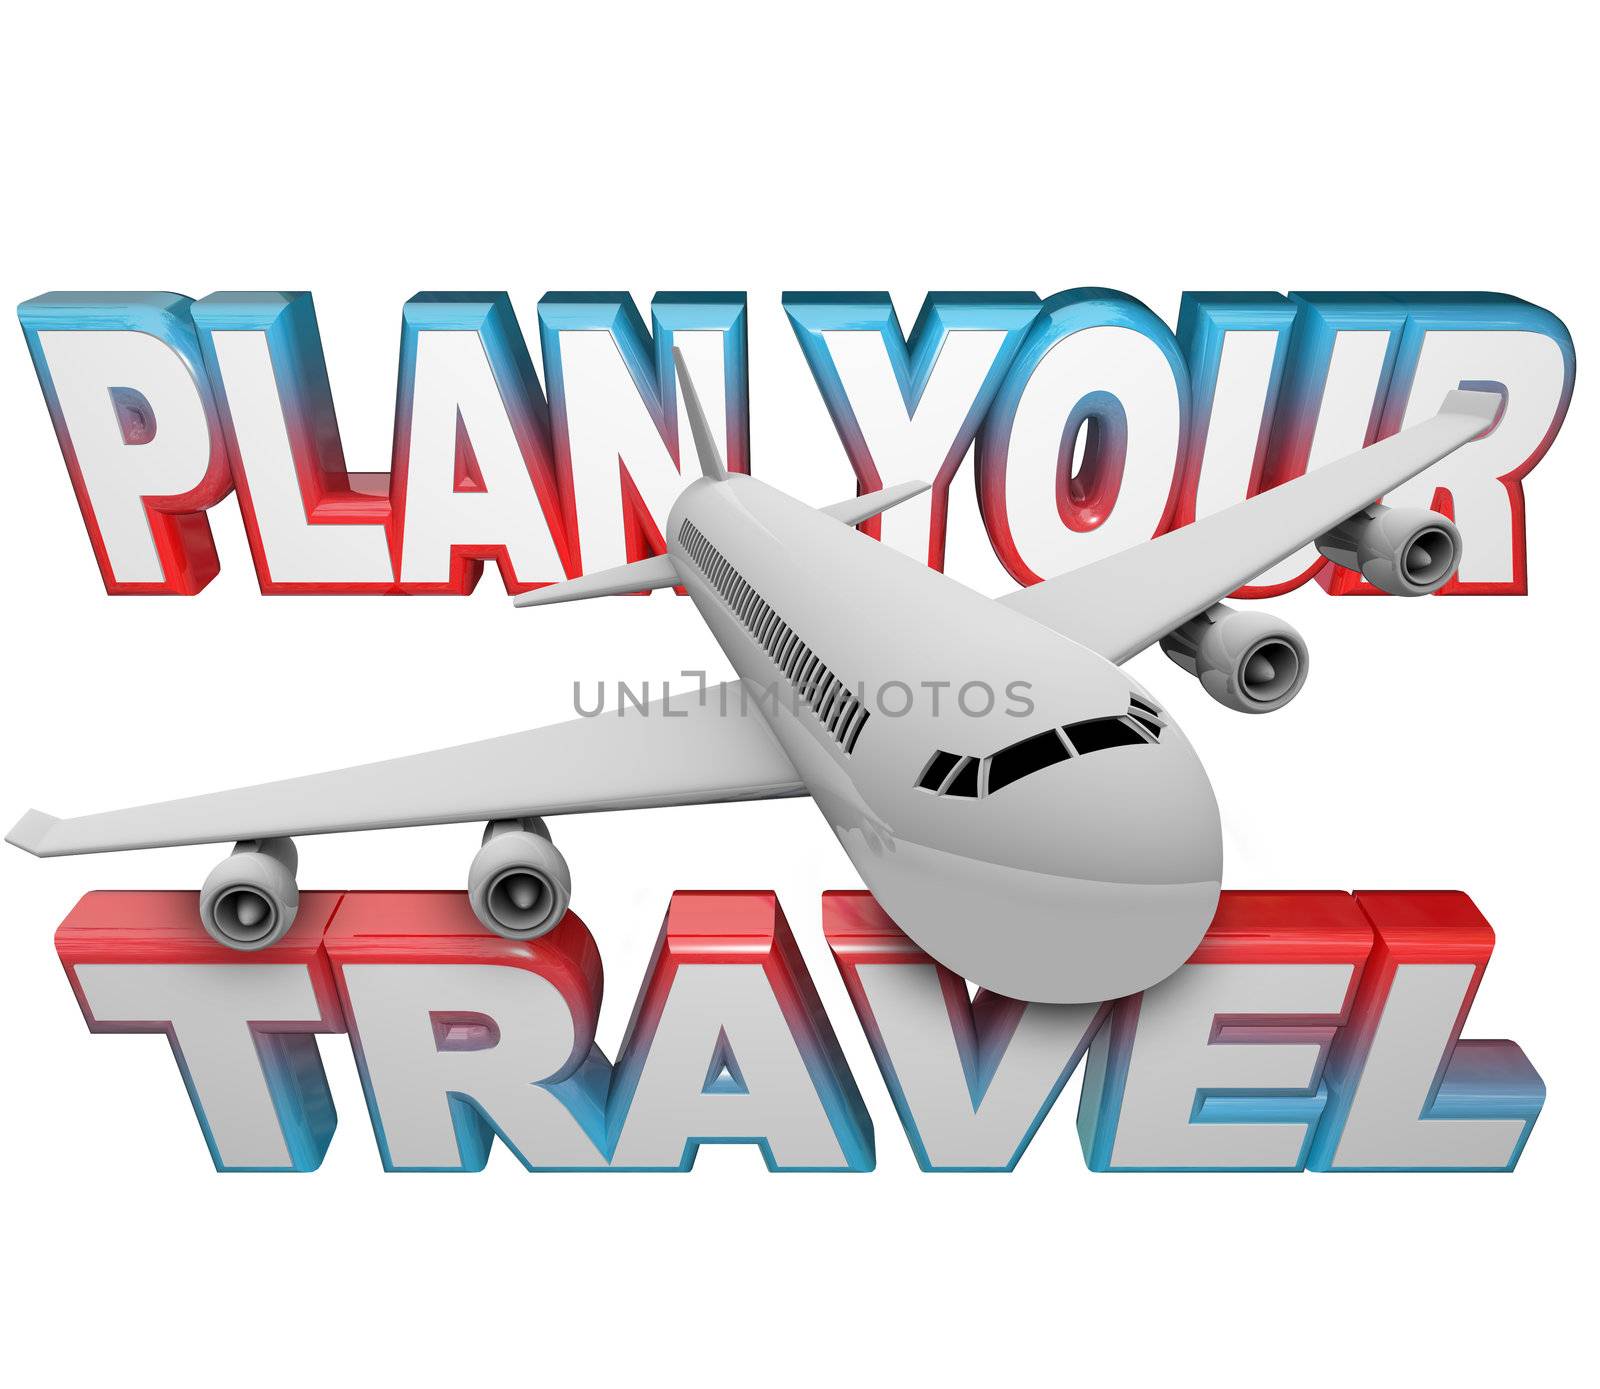 The words Plan Your Travel in the background with a white jet airplane flying above it reminding you to do your planning and set your vacation, holiday or business traveling plans early in advance of your departure date